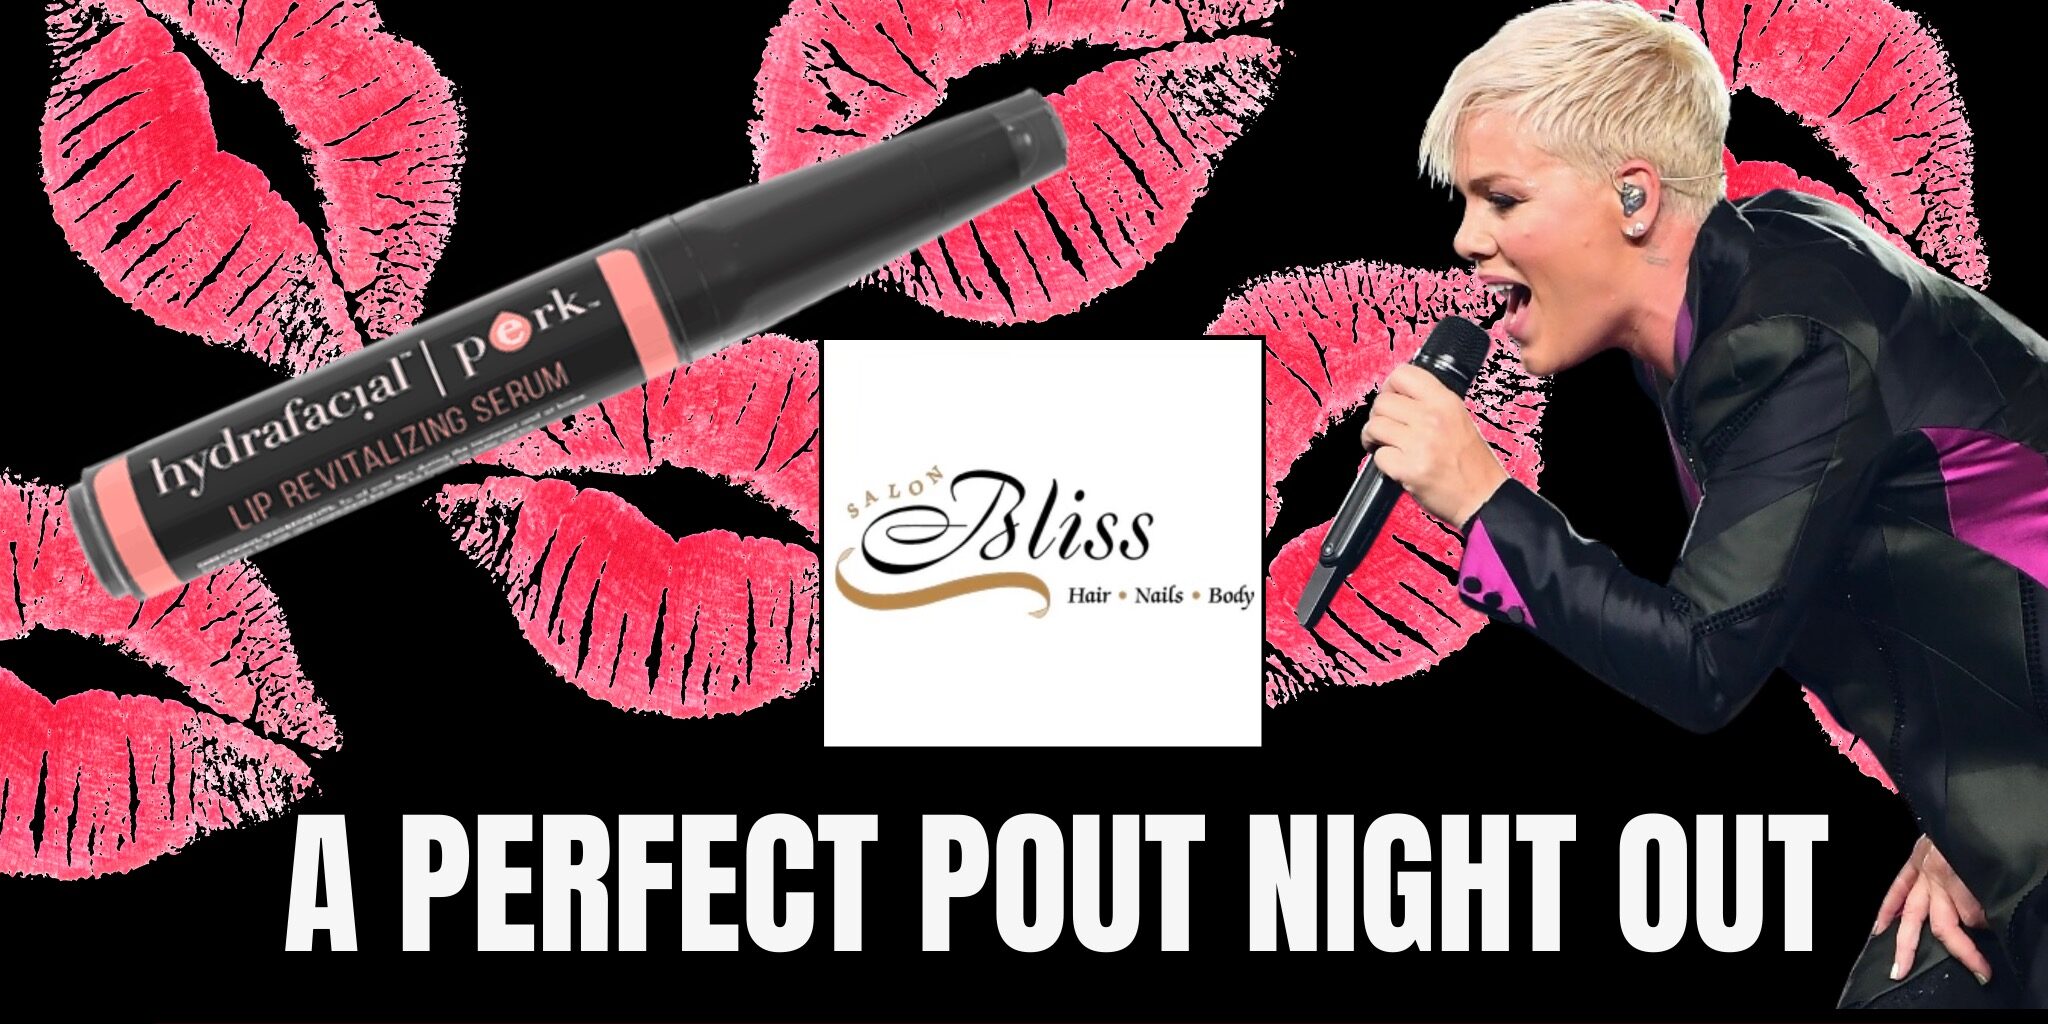 <h1 class="tribe-events-single-event-title">Hannah B @ Perfect Pout Night Out at Salon Bliss</h1>